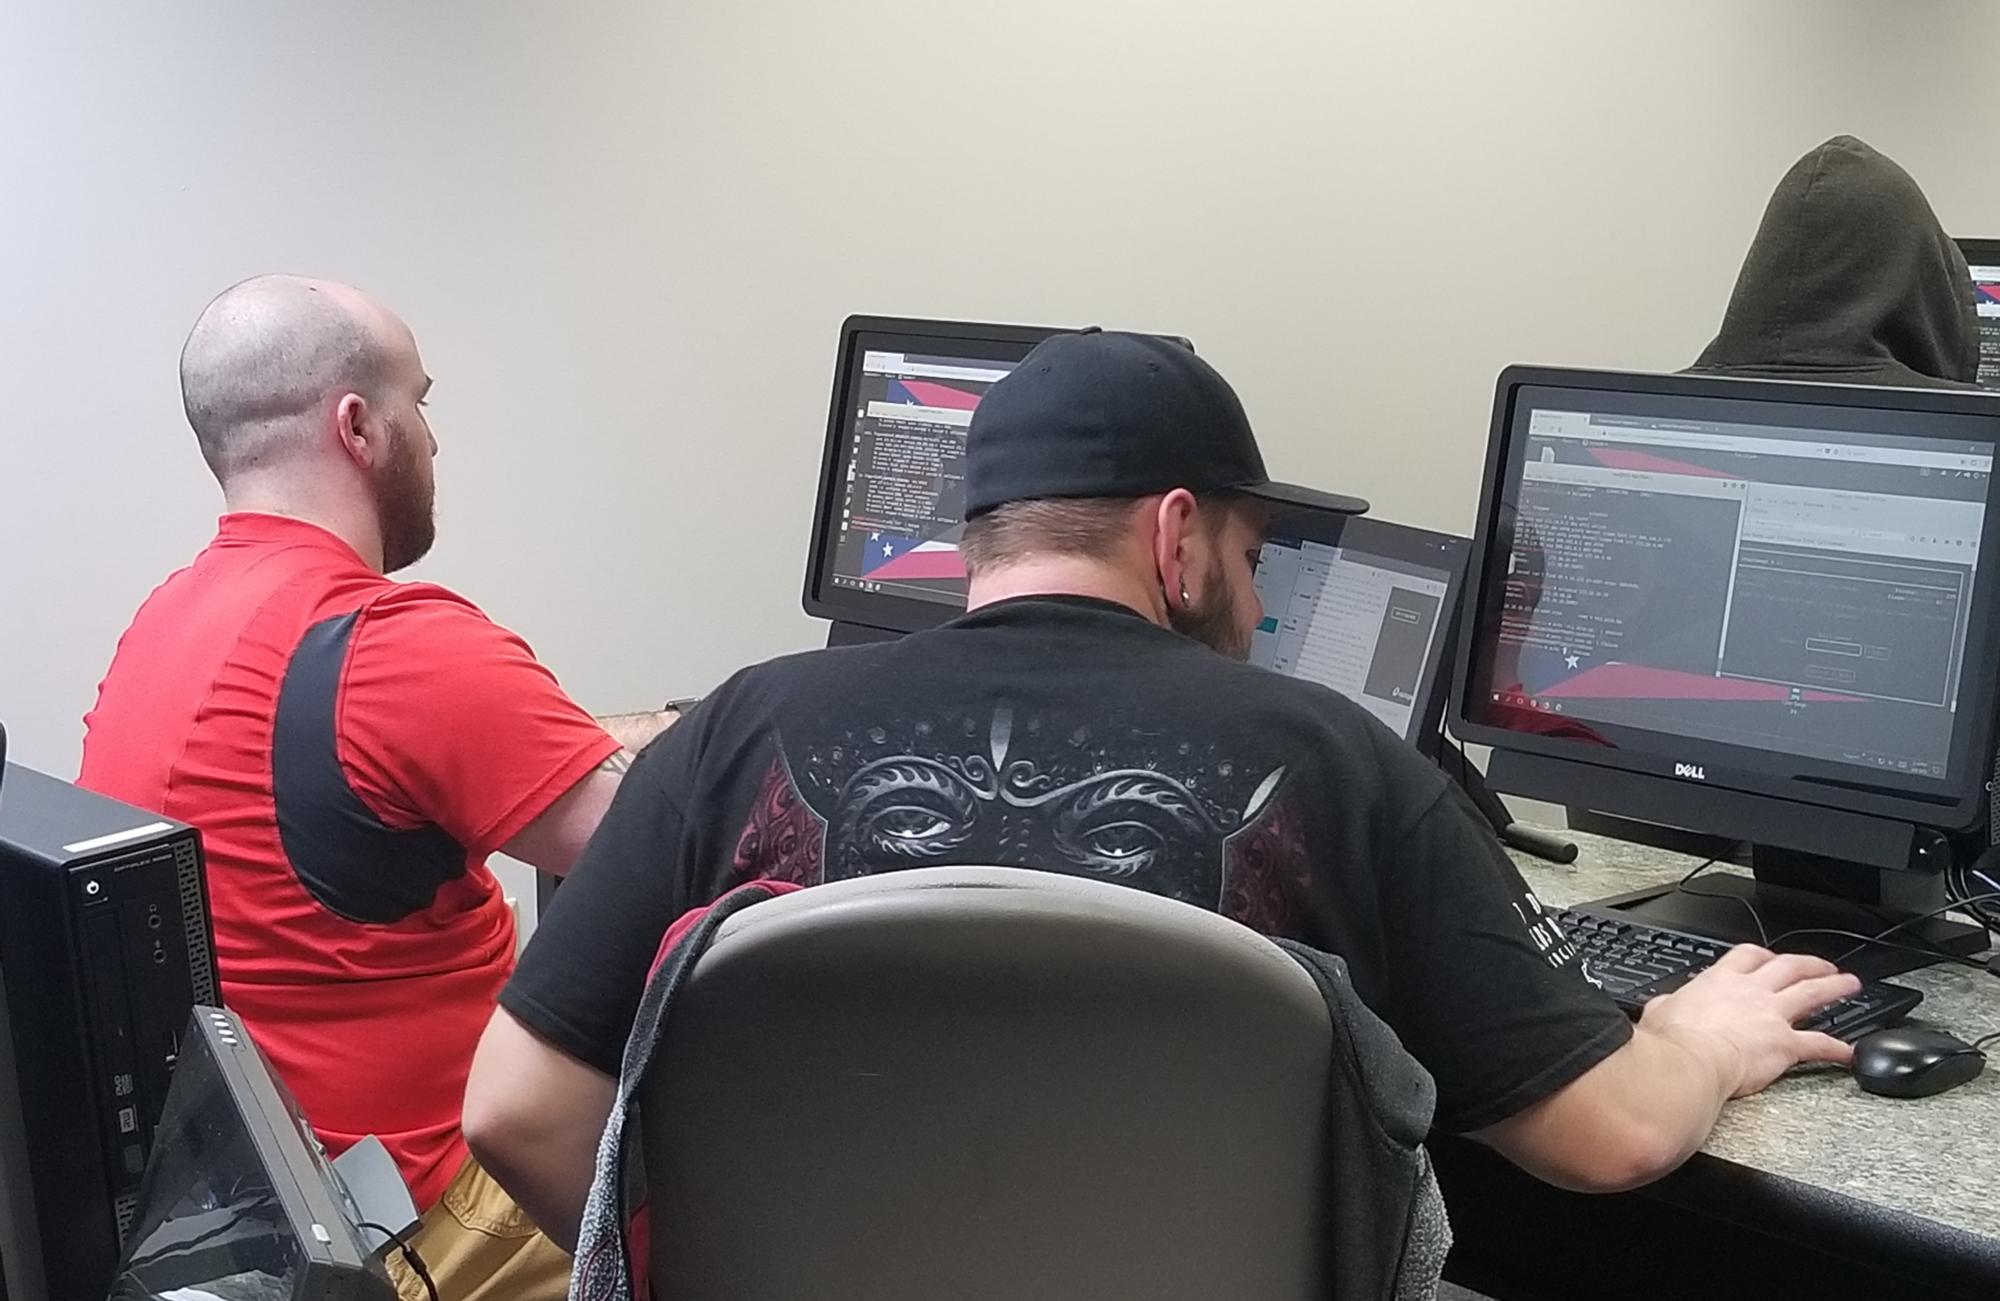 Students from Hocking College work through the Capture the Flag challenges in the Ohio University Chillicothe computer lab